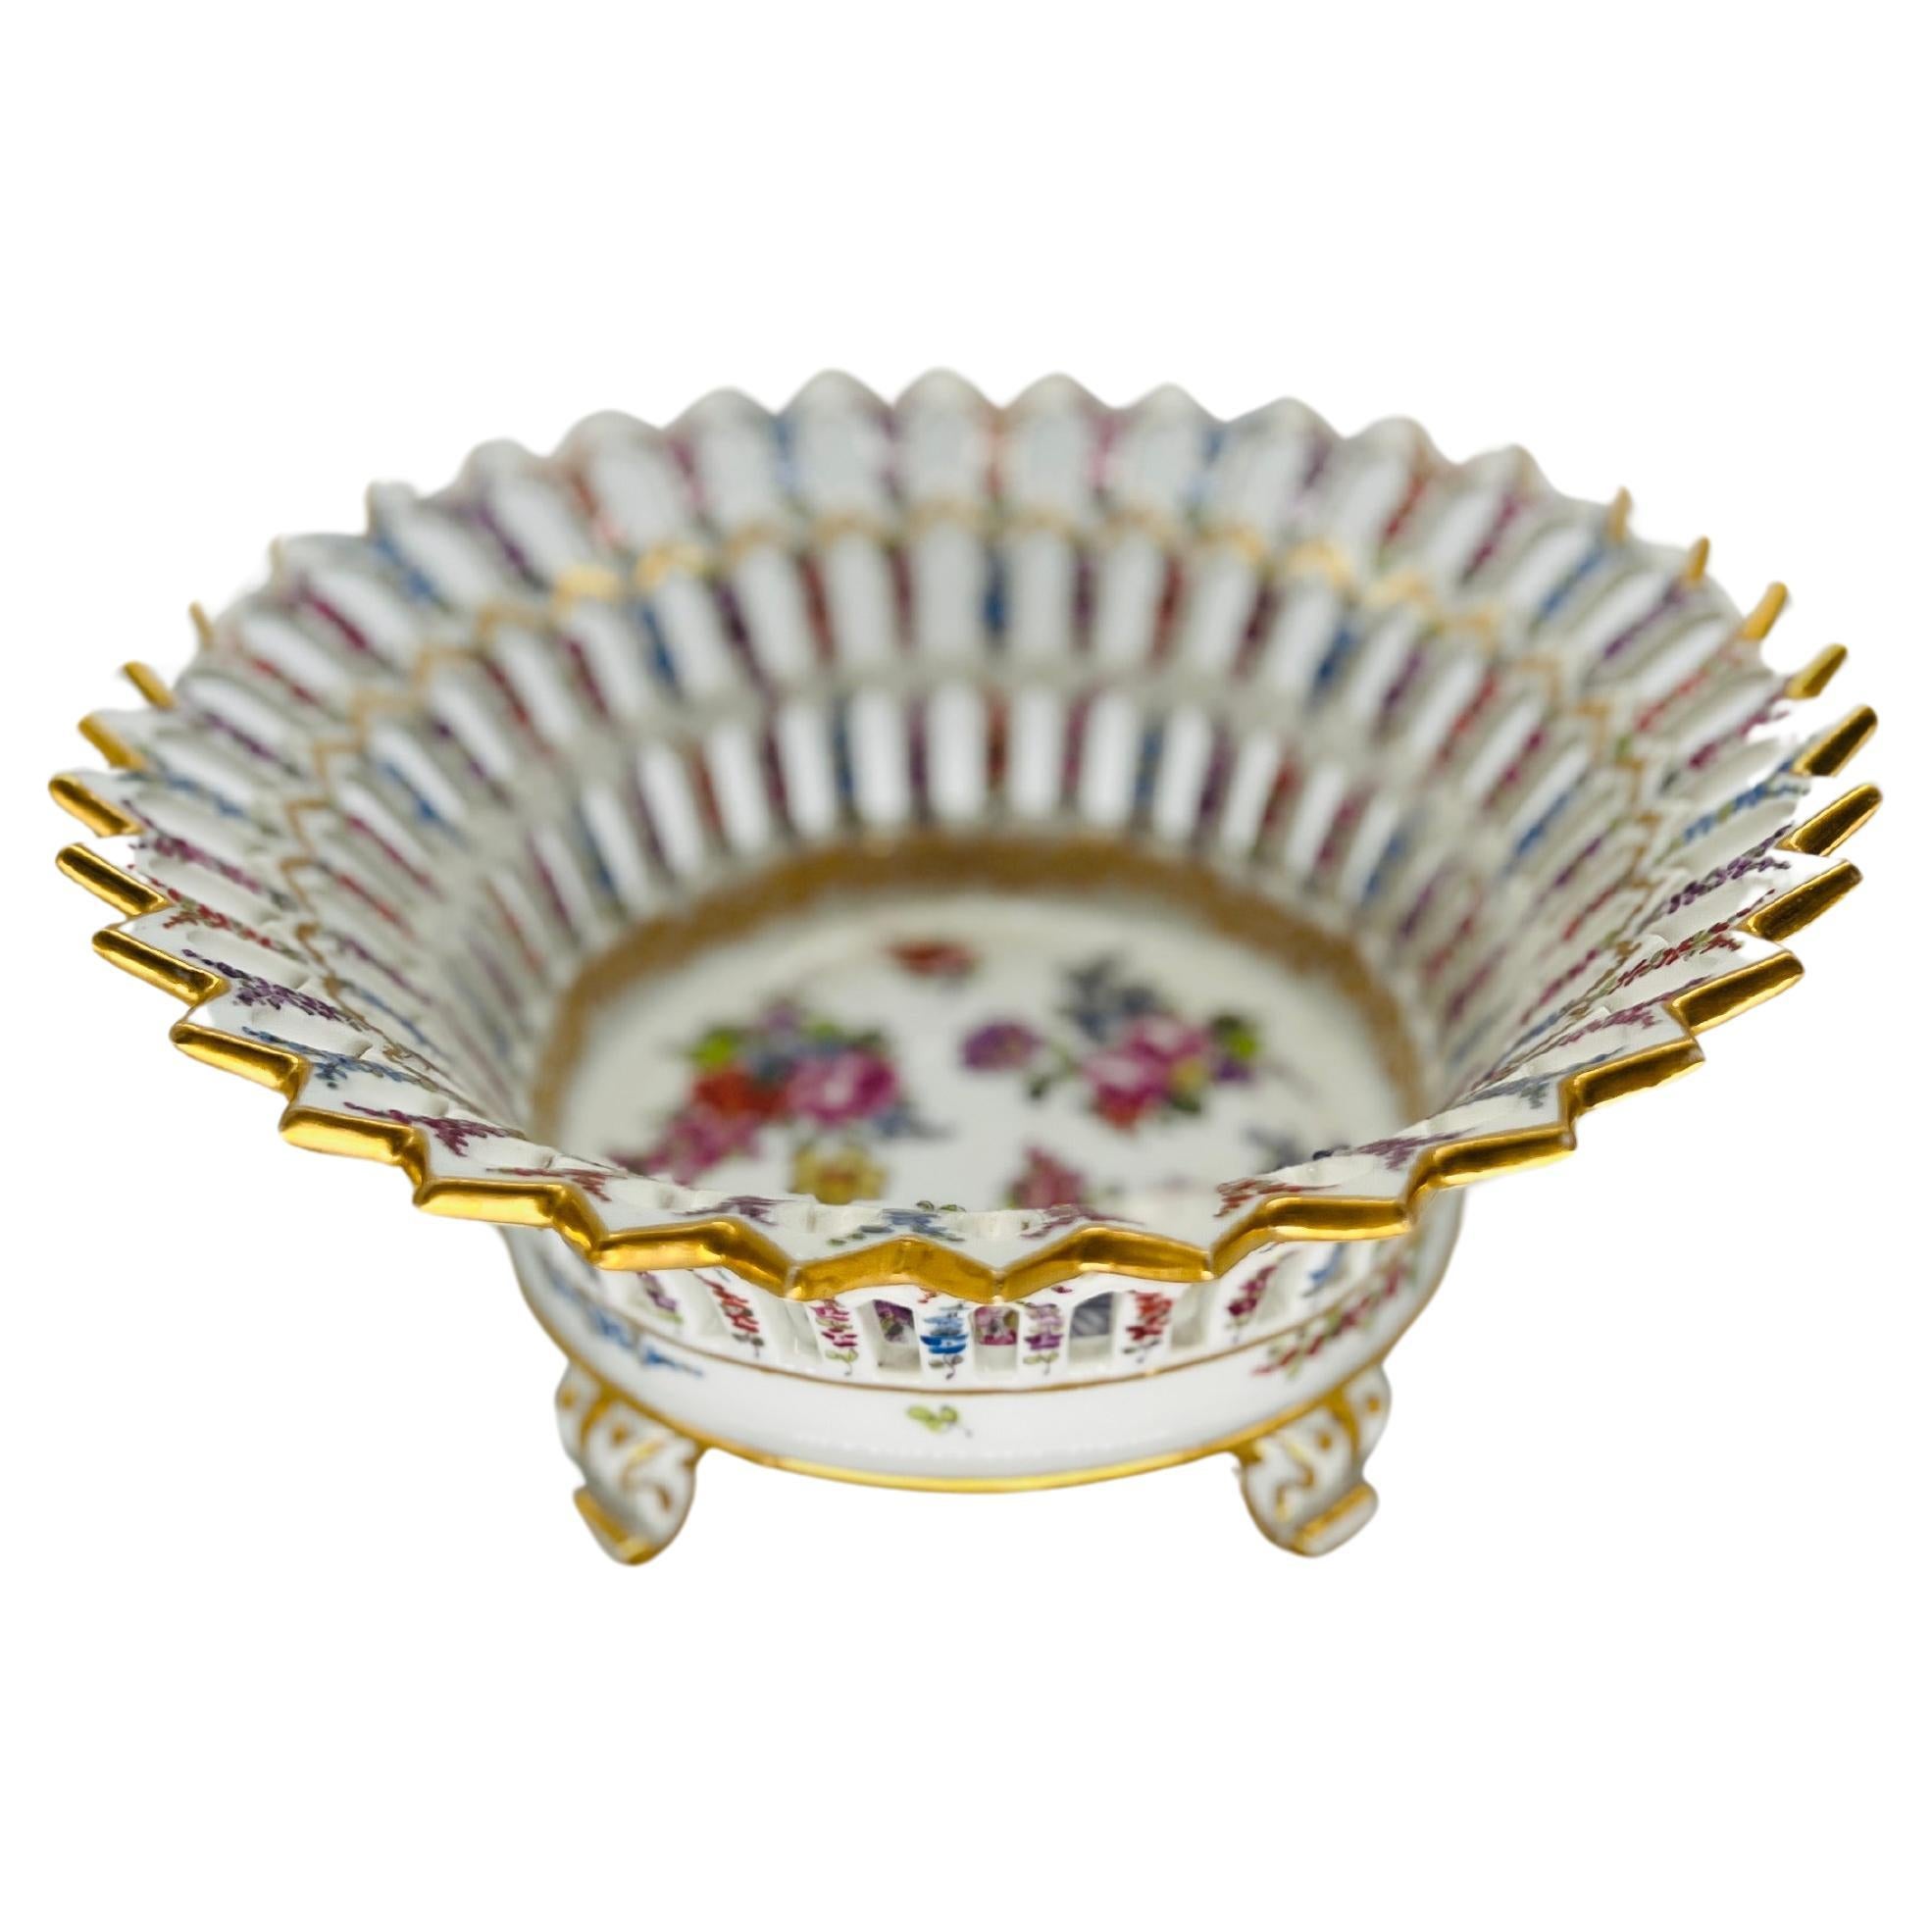 This exquisite antique Meissen Porcelain Pierced Floral Decorated Fruit Basket, dating back to circa 1920, embodies the timeless elegance and craftsmanship for which the renowned Meissen porcelain factory is celebrated. Delicately crafted from fine